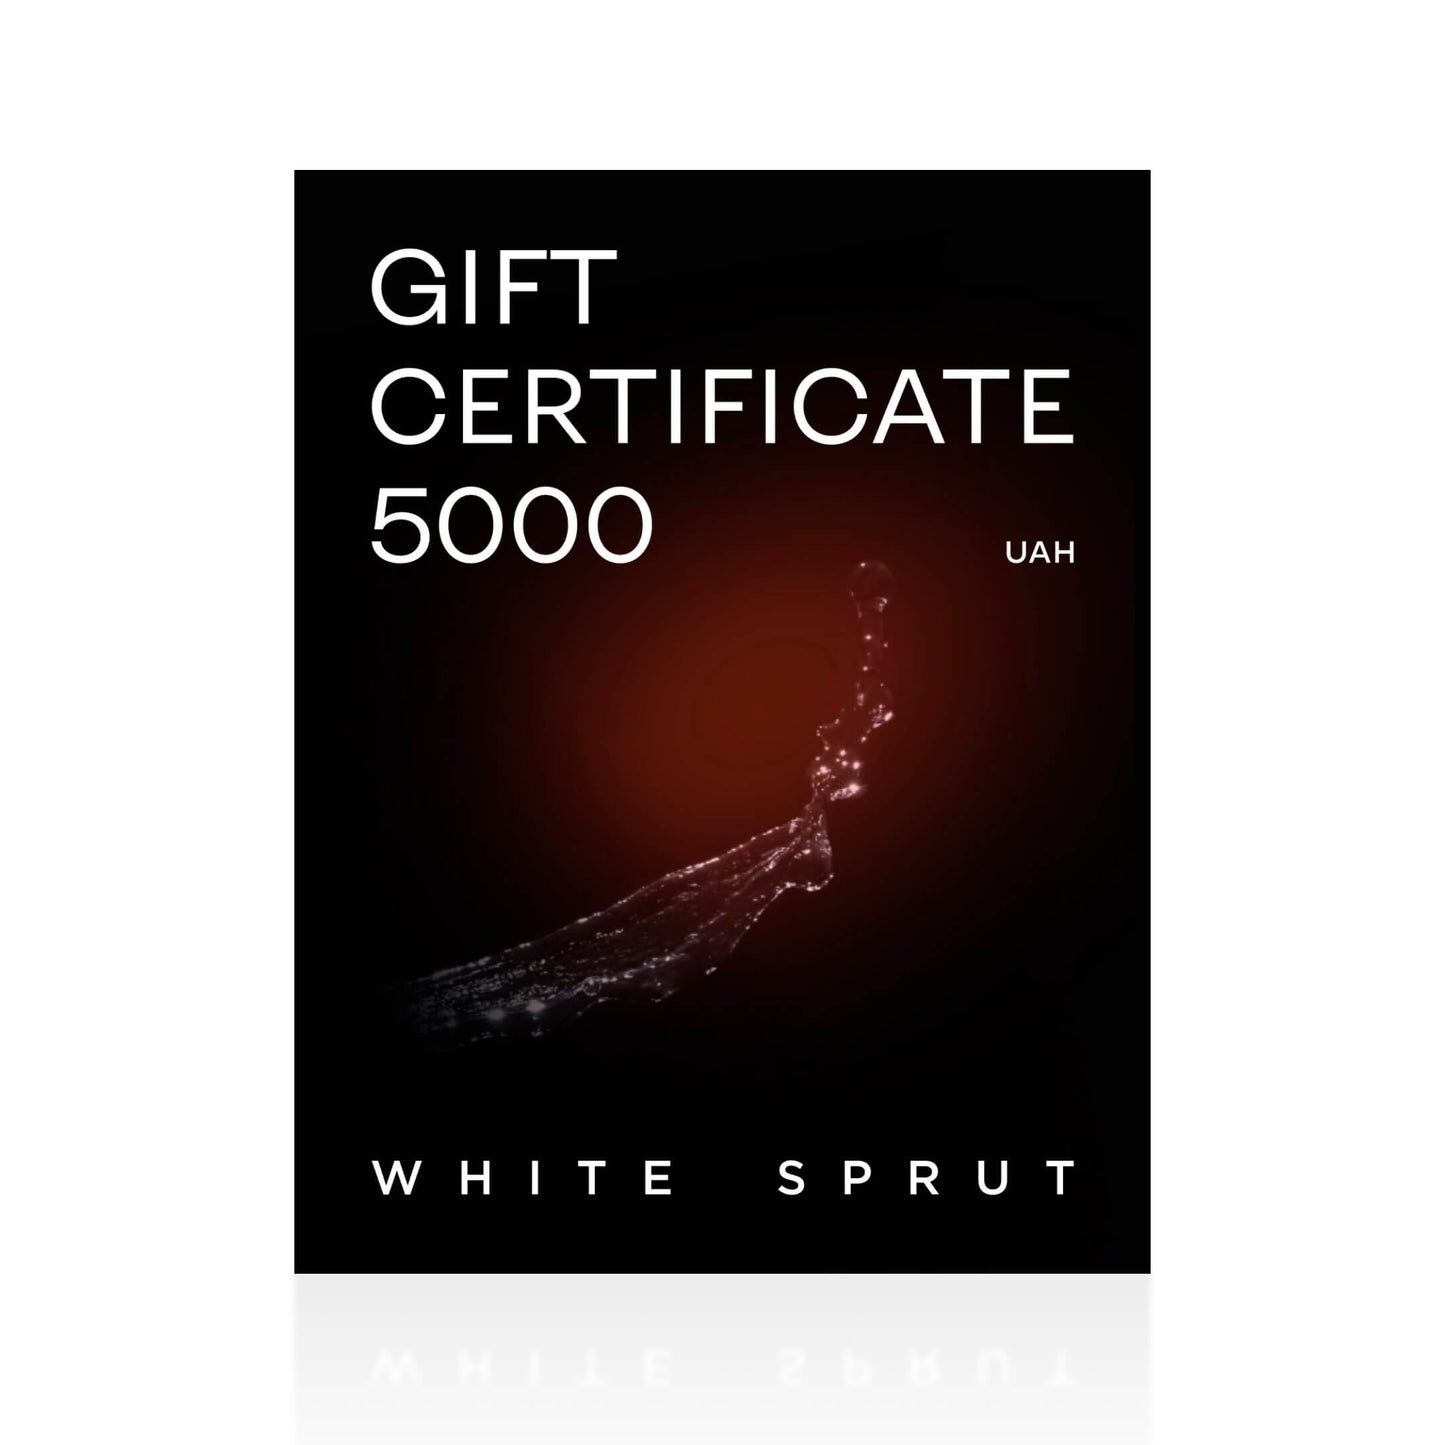 Gift certificate 5000